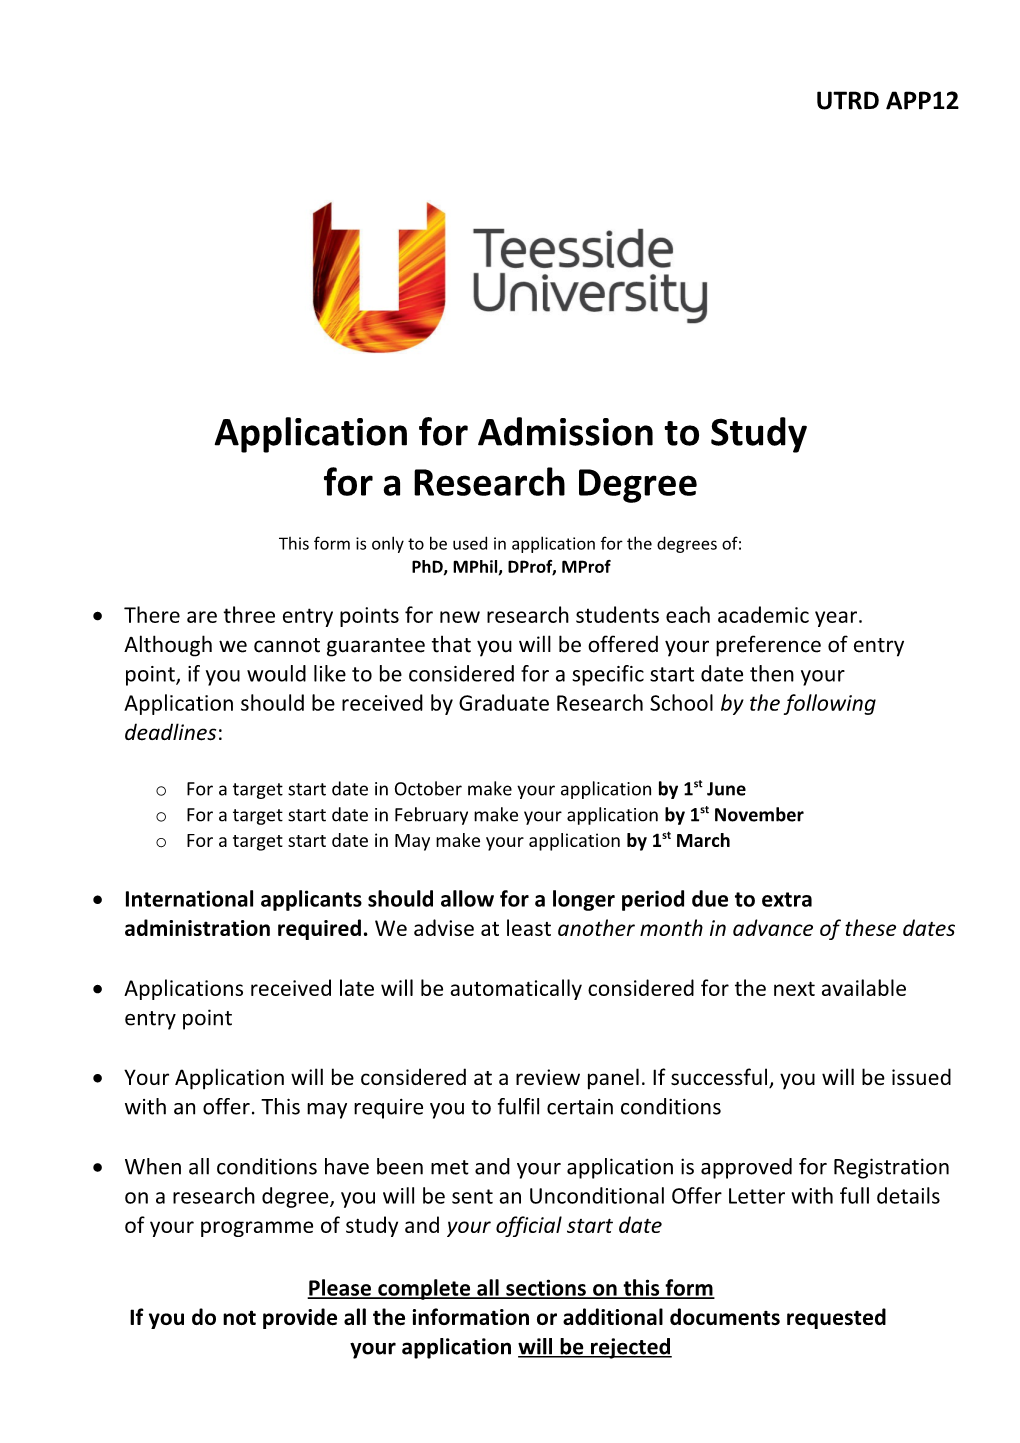 Application for Admission to Study